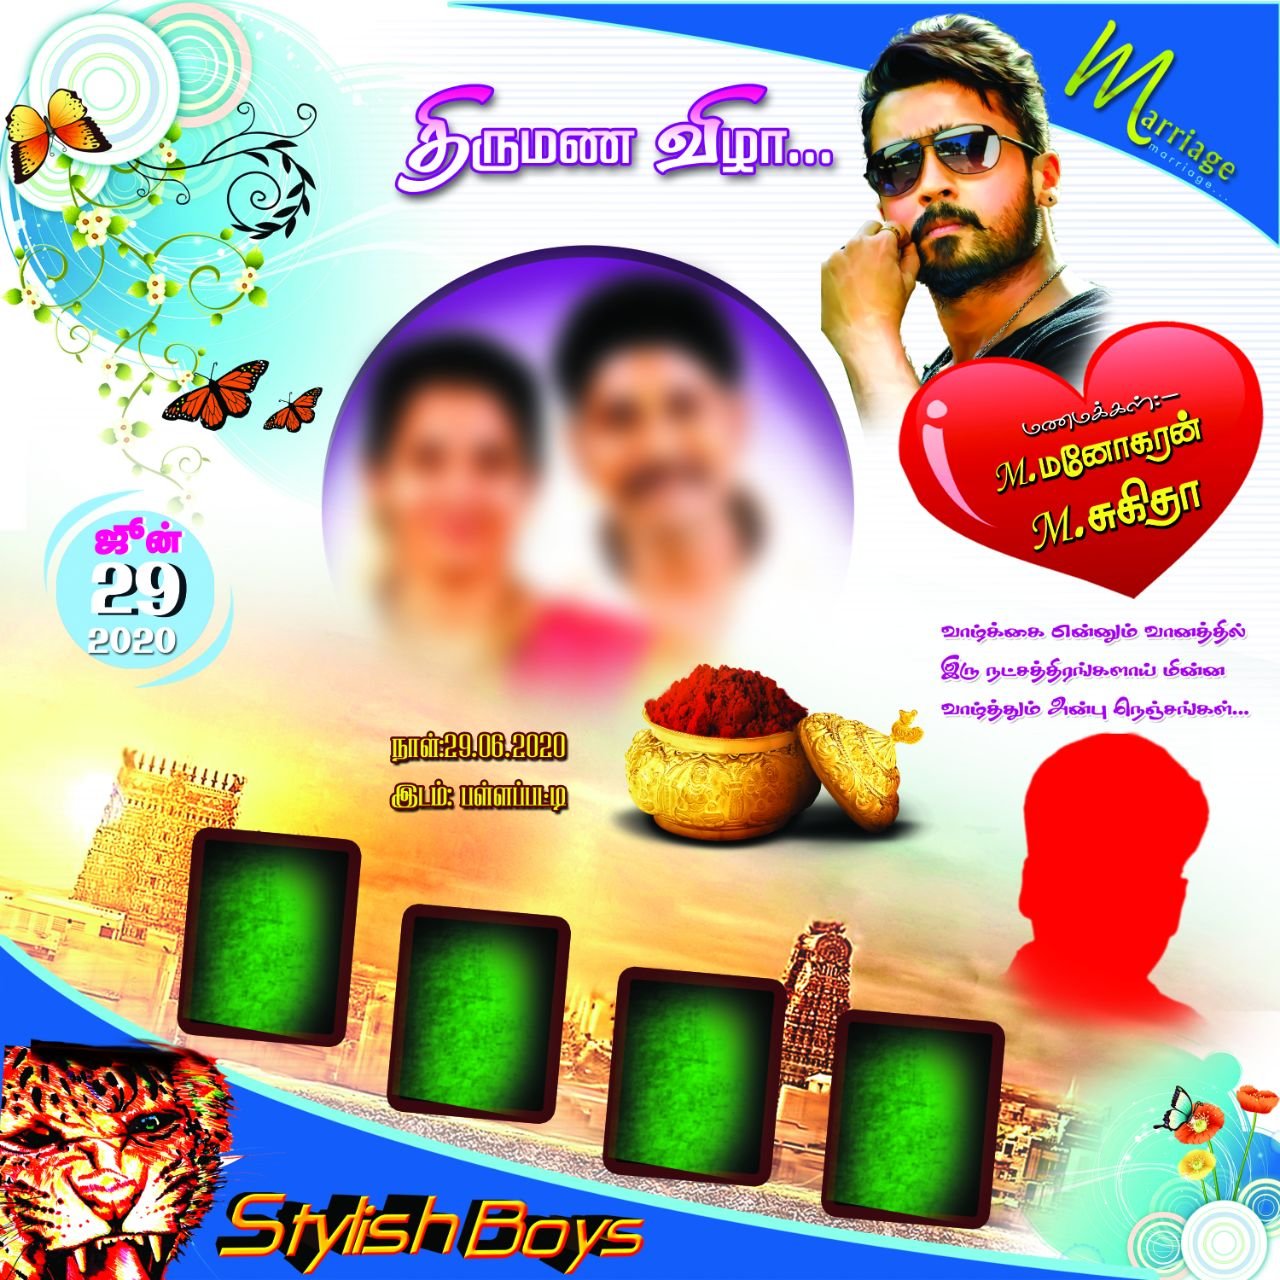 Wedding Editing Birthday Flex Banner Background Design Tamil You Can Customize Your Banner Further By Finding Your Brand Colors In The Editor And Using Them In Any Of Your Designs Free flex banner design templates | banner design for photoshop psd #1. all images